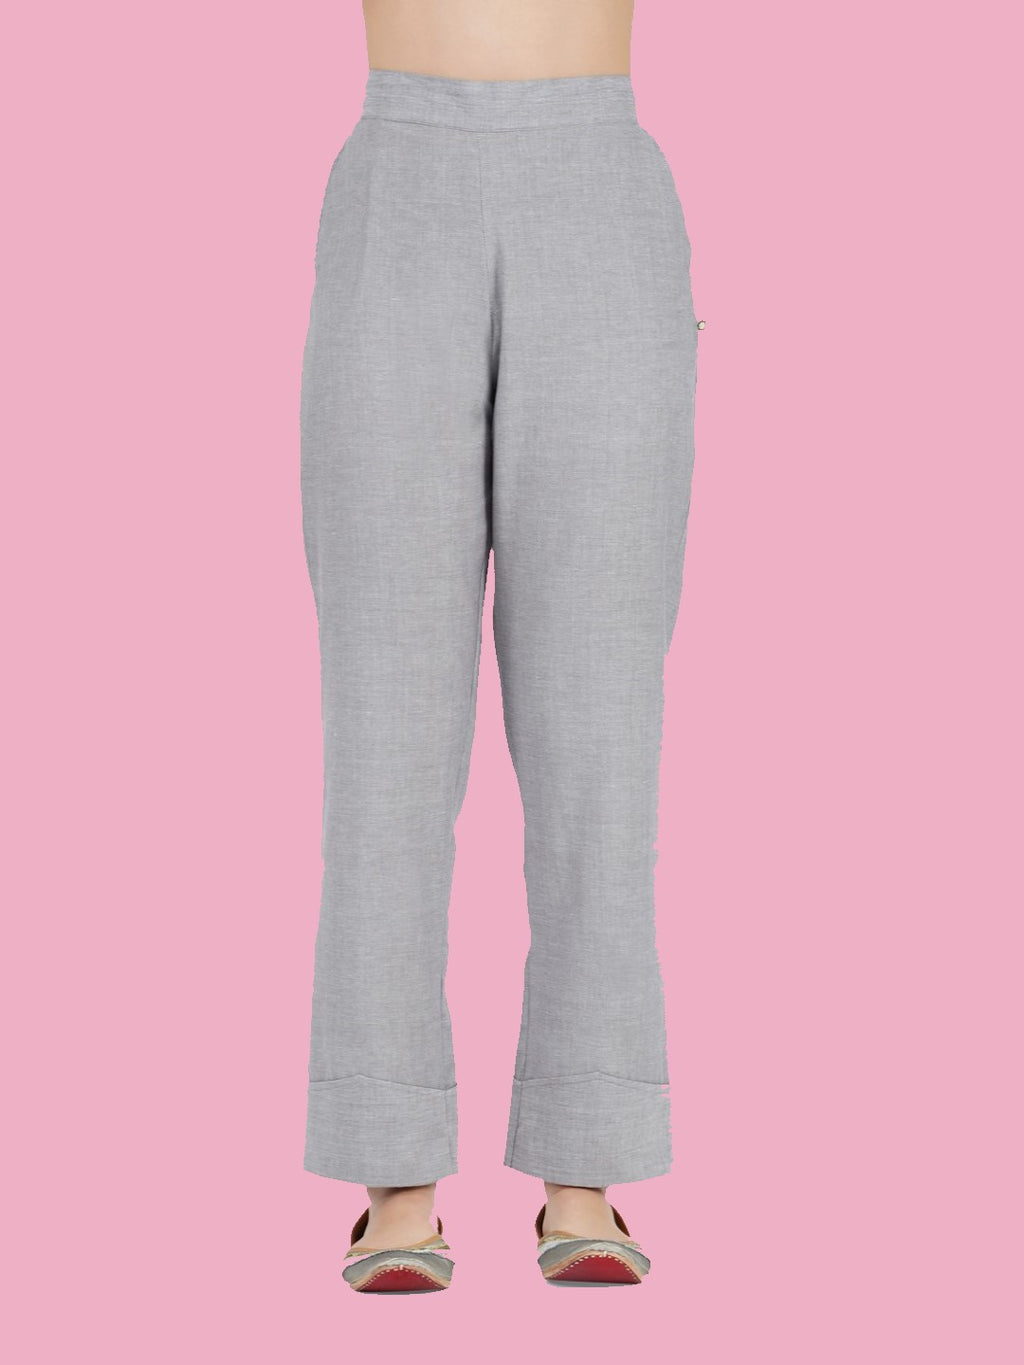 Chambray solid cuffed pants-Bottoms-Fabnest